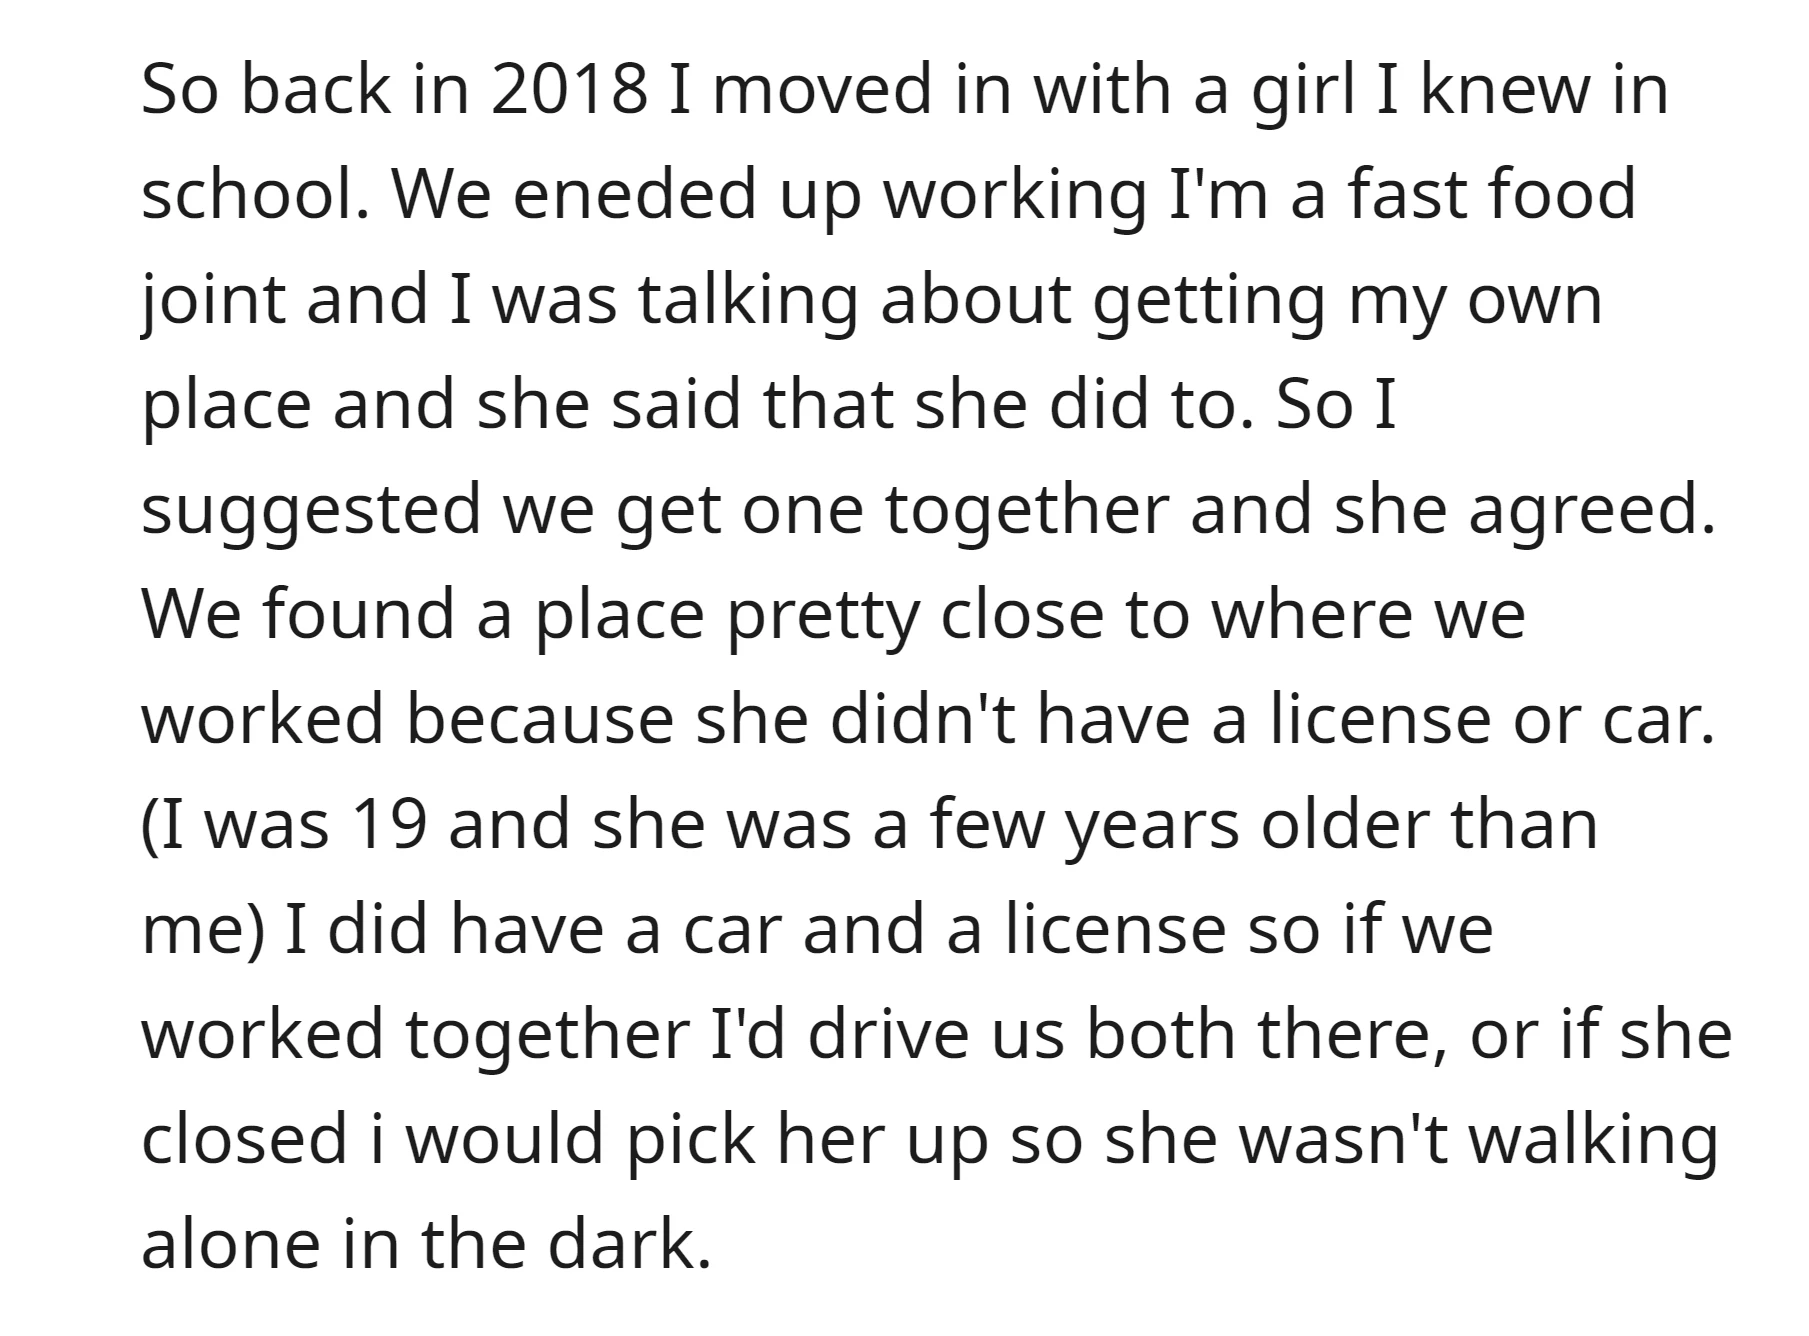 OP's roommate doesn't have a car, so she drive her to and from work